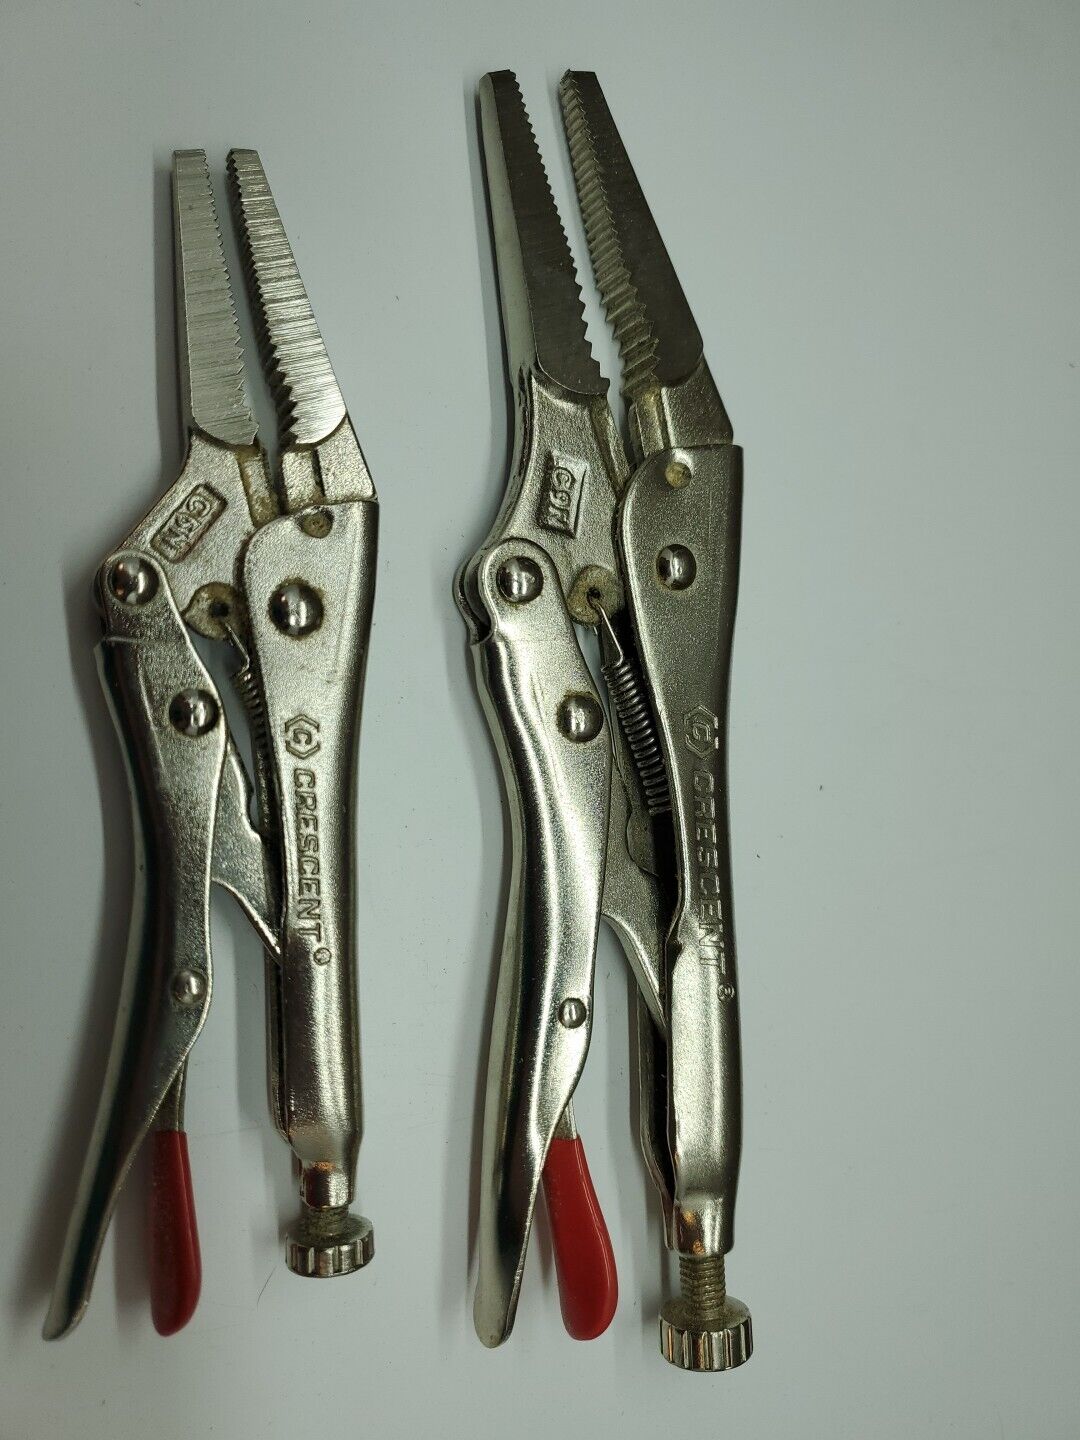 Crescent Lot of 2 Vise Grip Pliers C6N And C9N